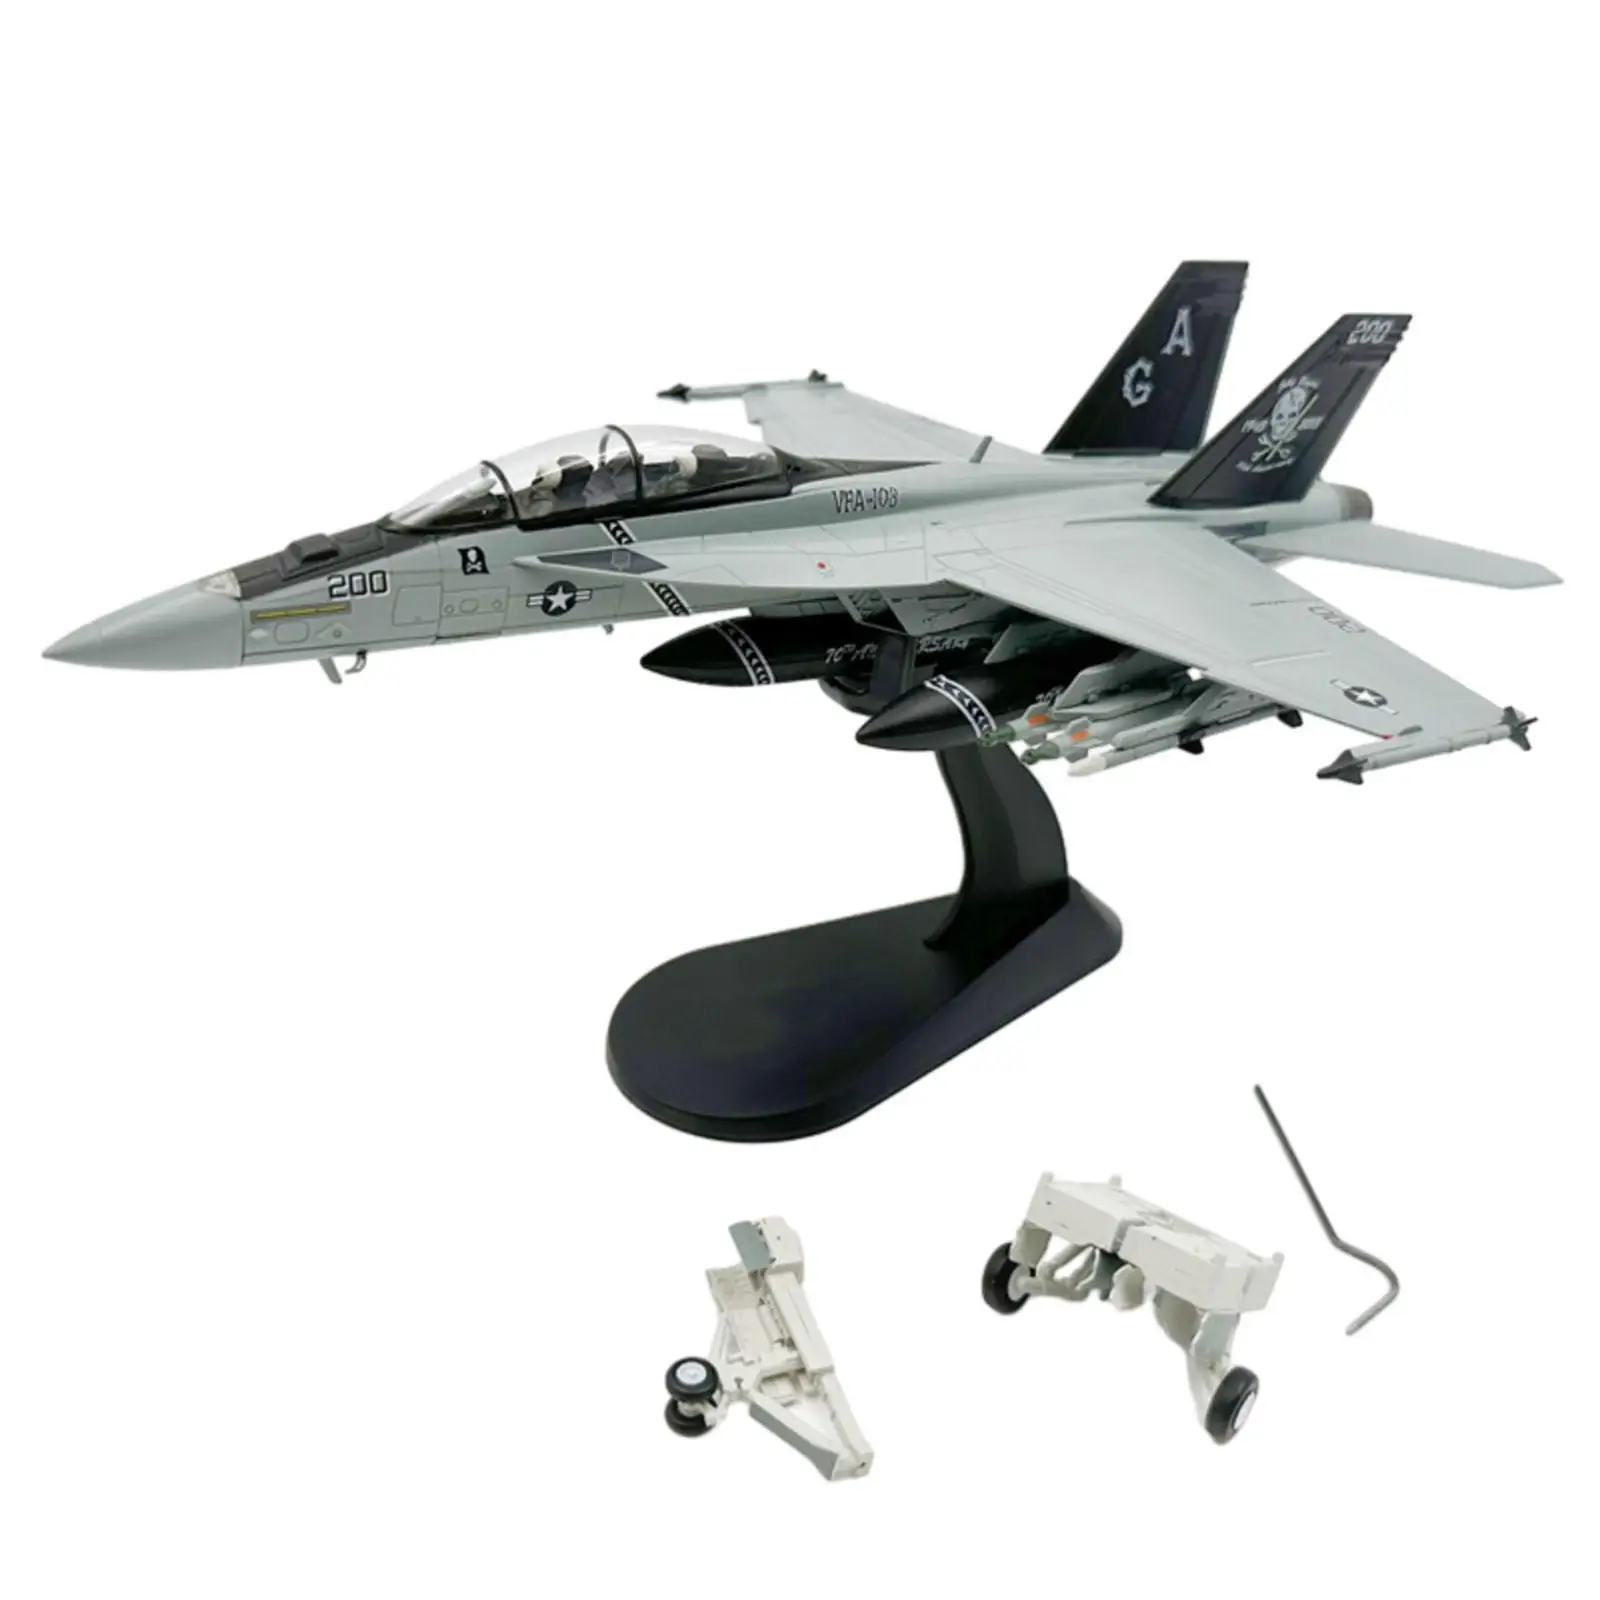 Airplane Model Metal Aircraft Model Collectibles, Diecast Aircraft Model 1/72 Fighter Model for Shelf